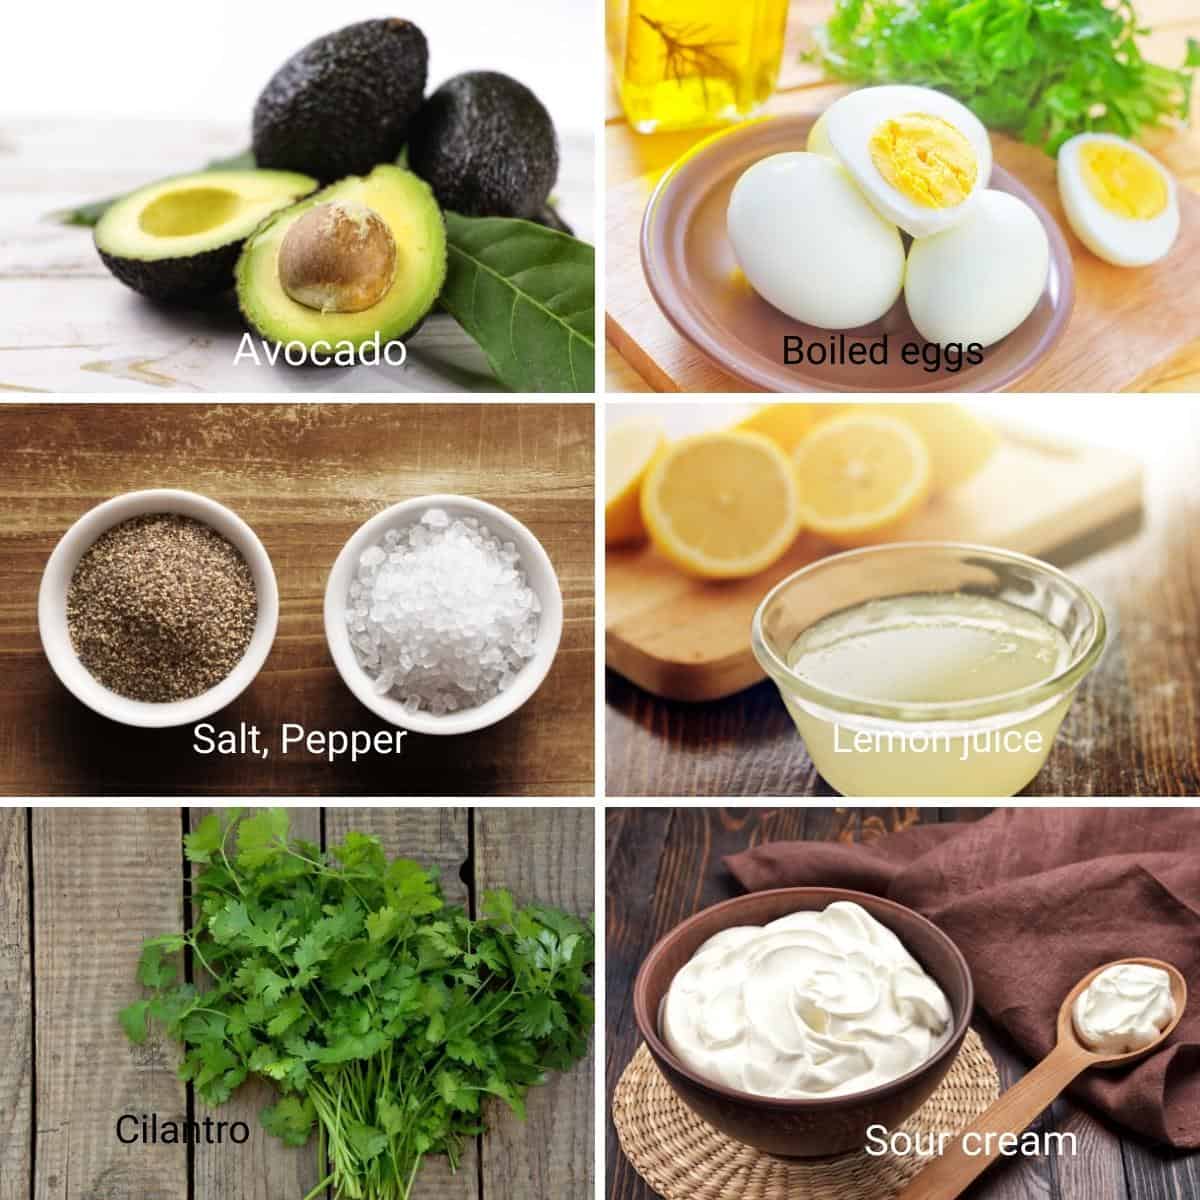 Ingredients for making sandwich with avocado and egg.